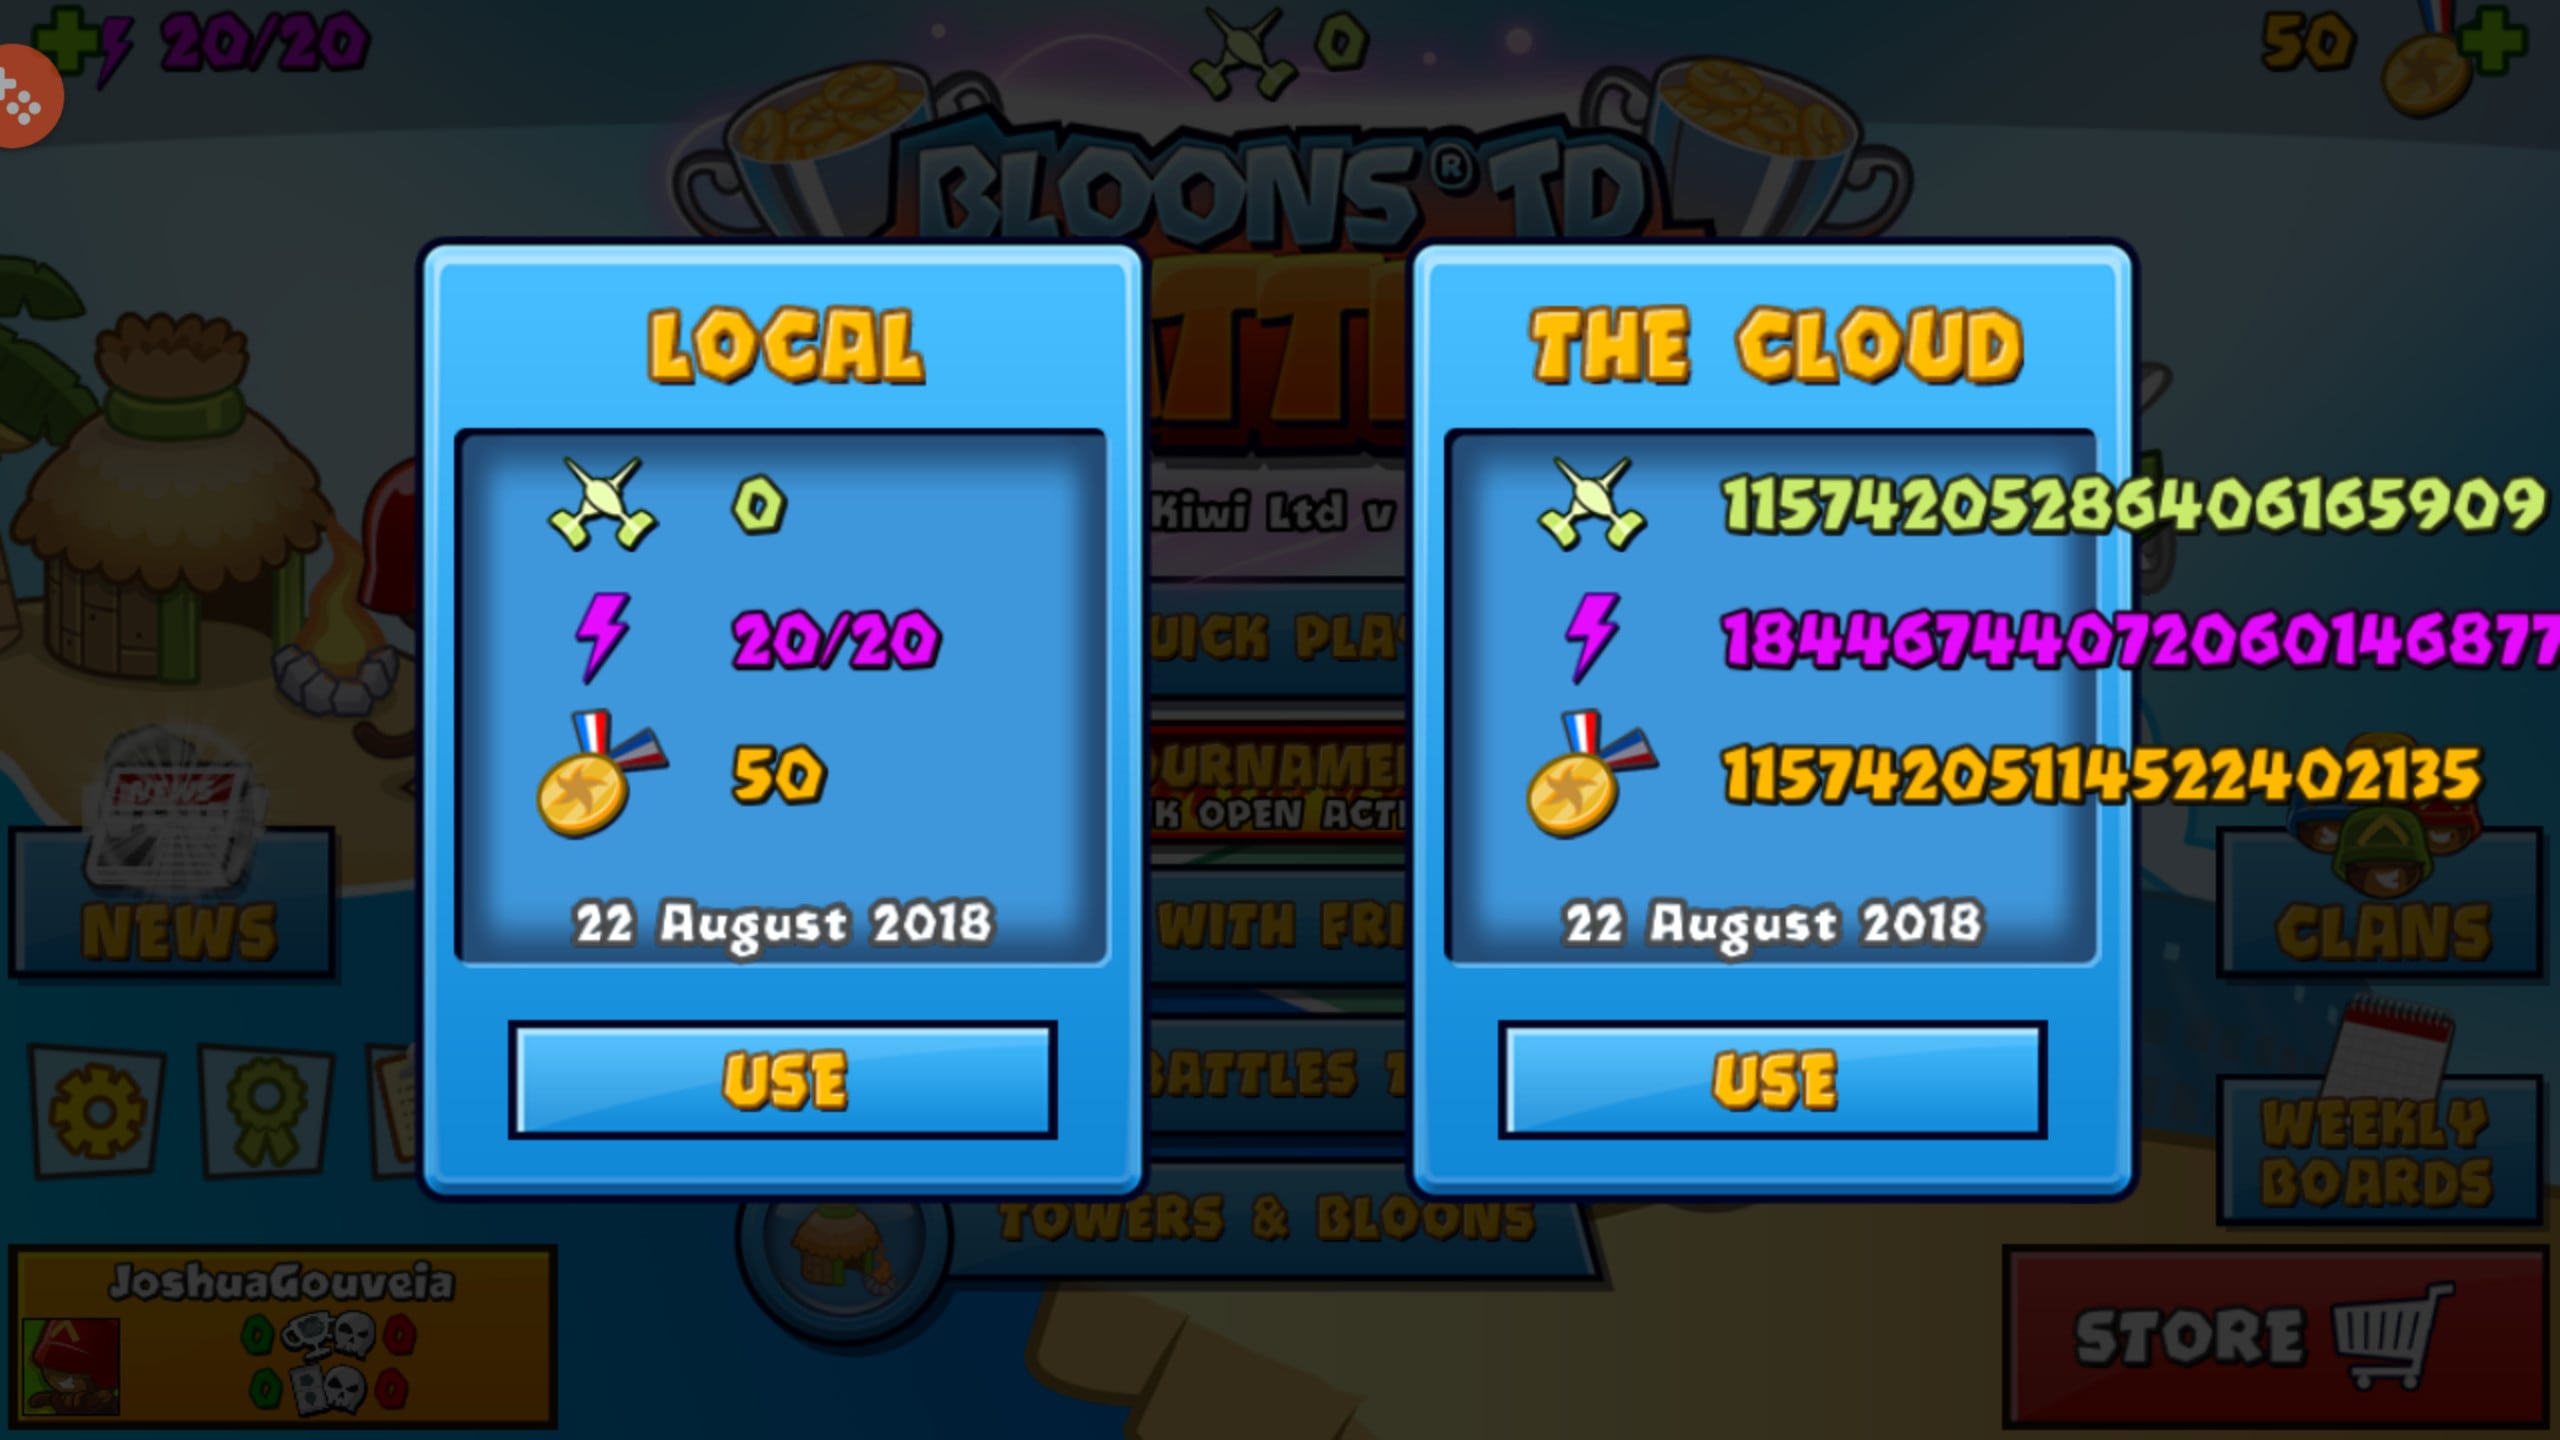 bloons td battles pc login with ios acount